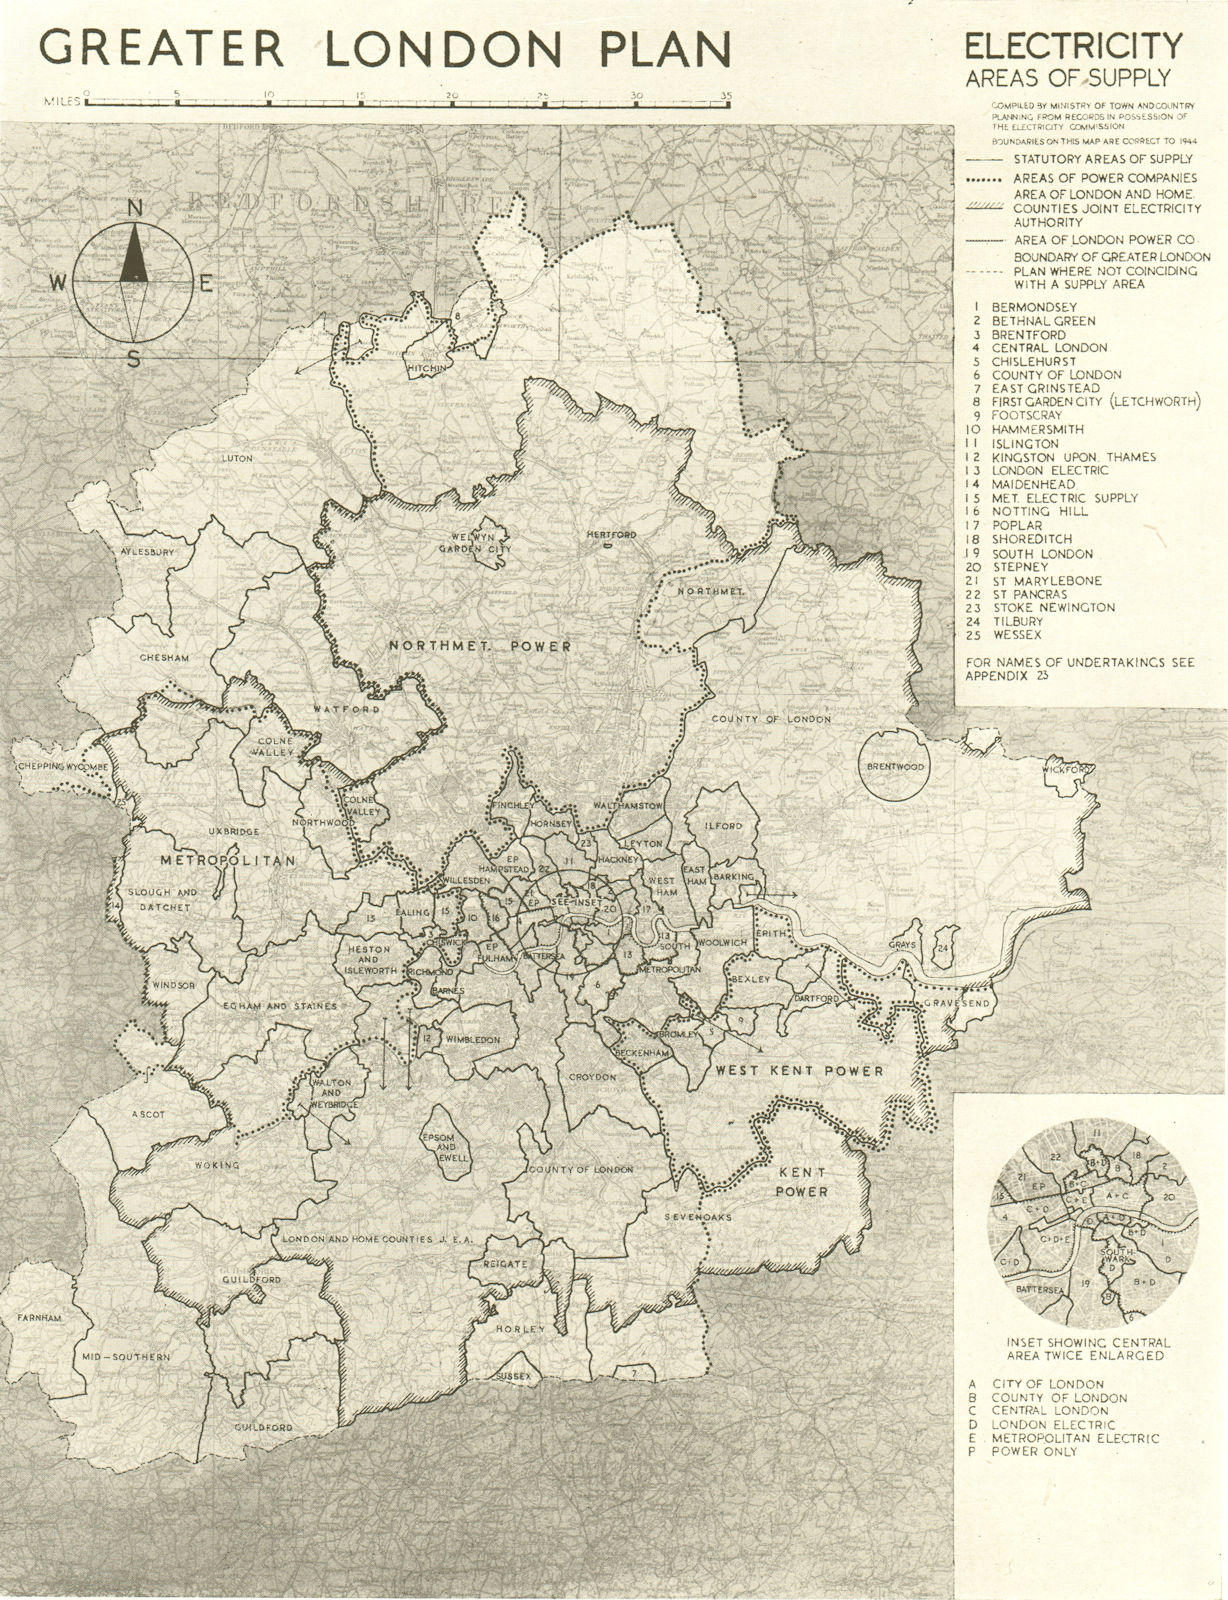 Associate Product GREATER LONDON PLAN. Electricity. Areas of supply. ABERCROMBIE 1944 old map